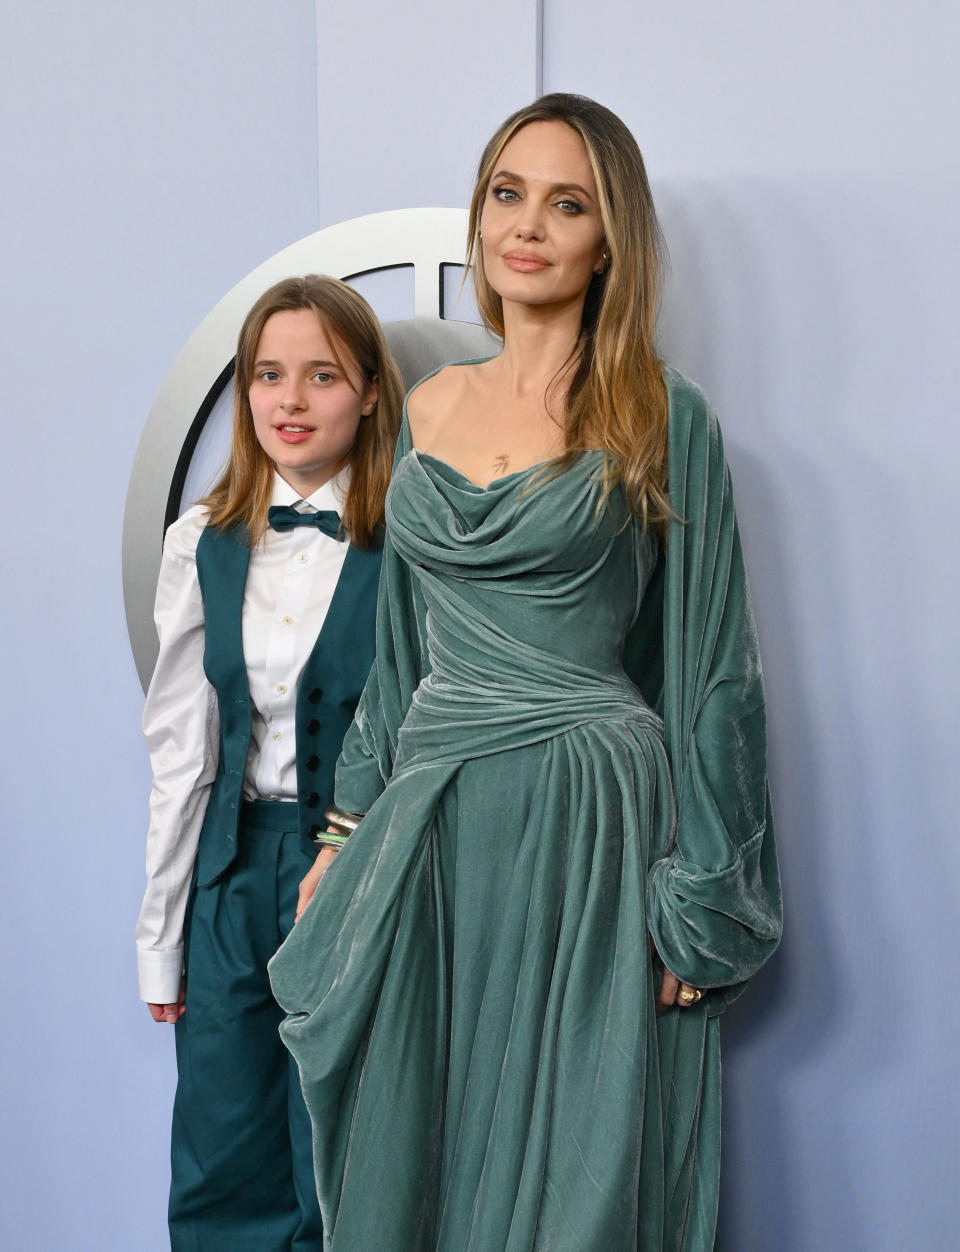 Jolie attended the awards show with her 15-year-old daughter, Vivienne, who also worked on 